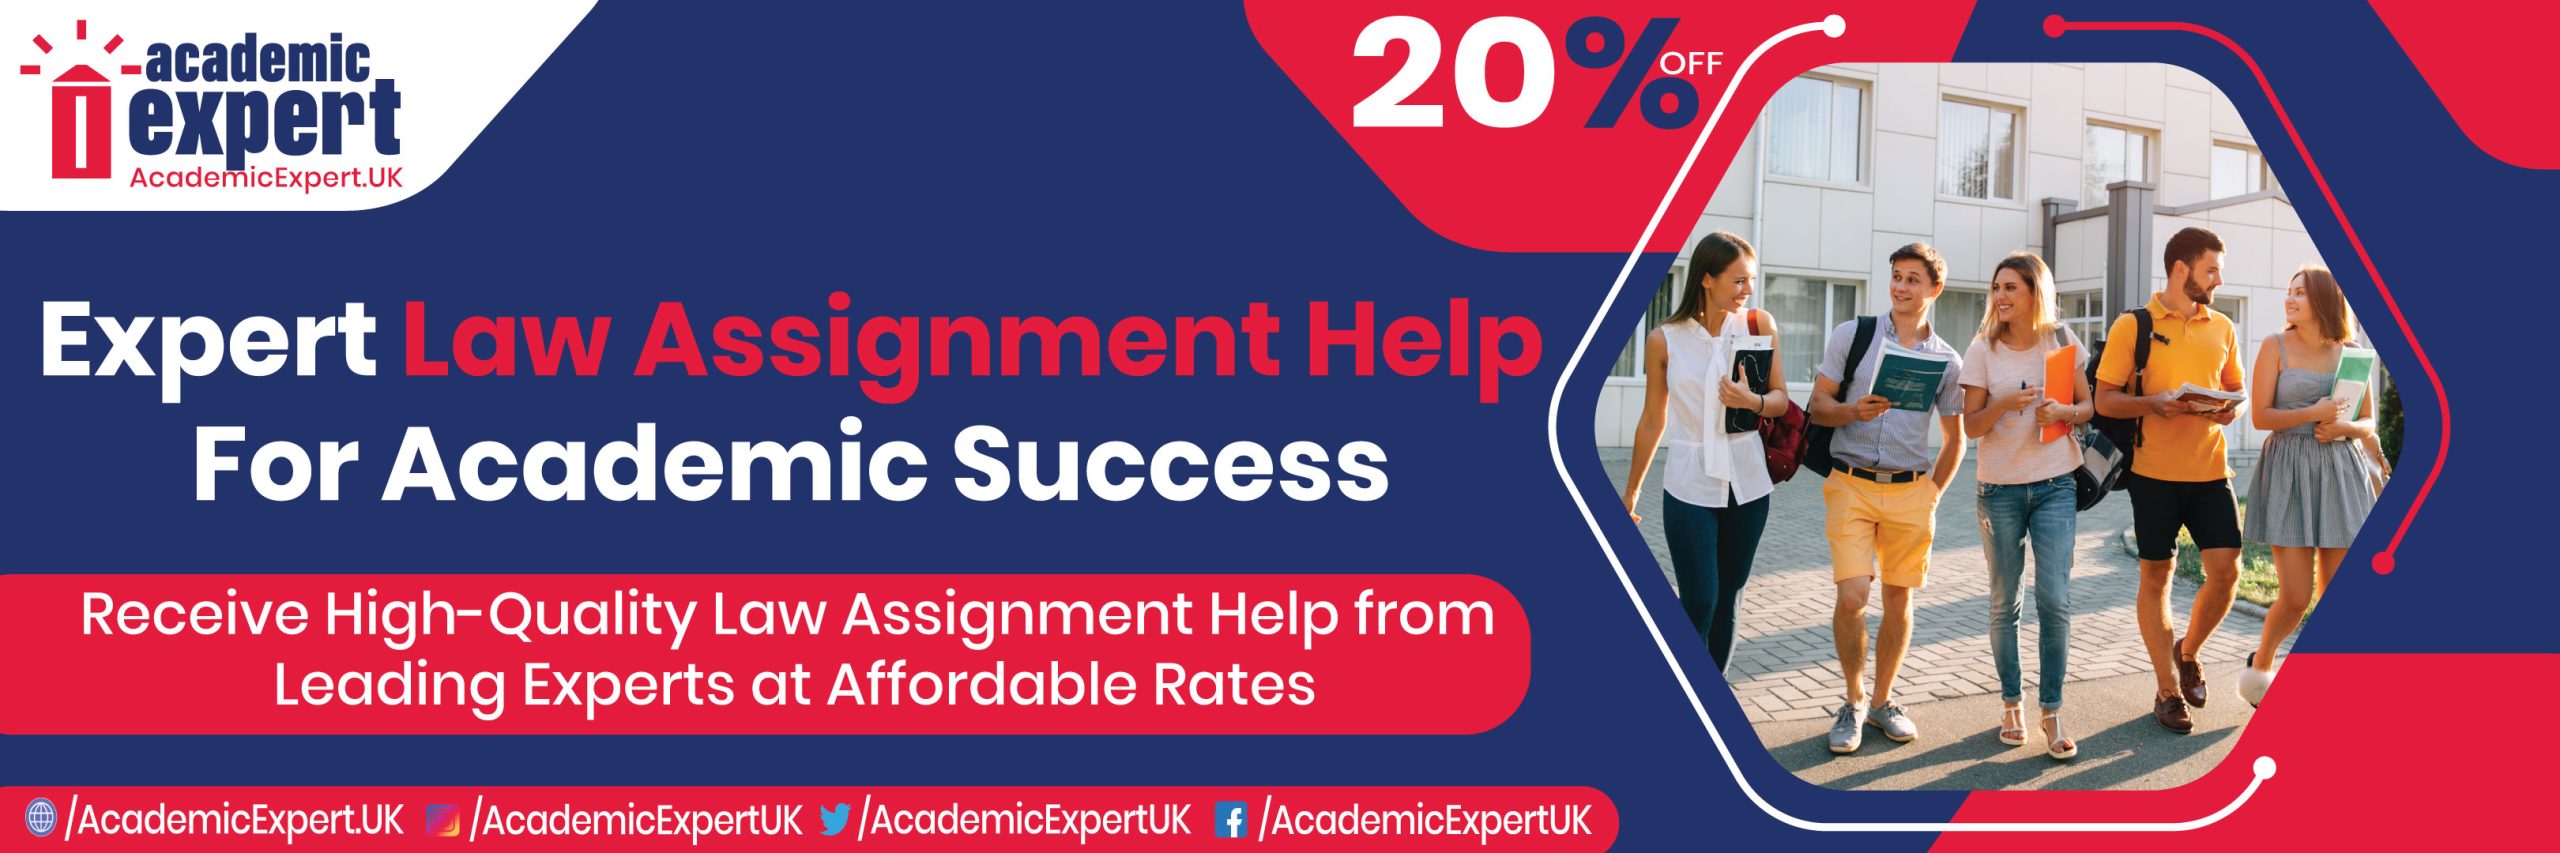 Expert Law Assignment Help For Academic Success